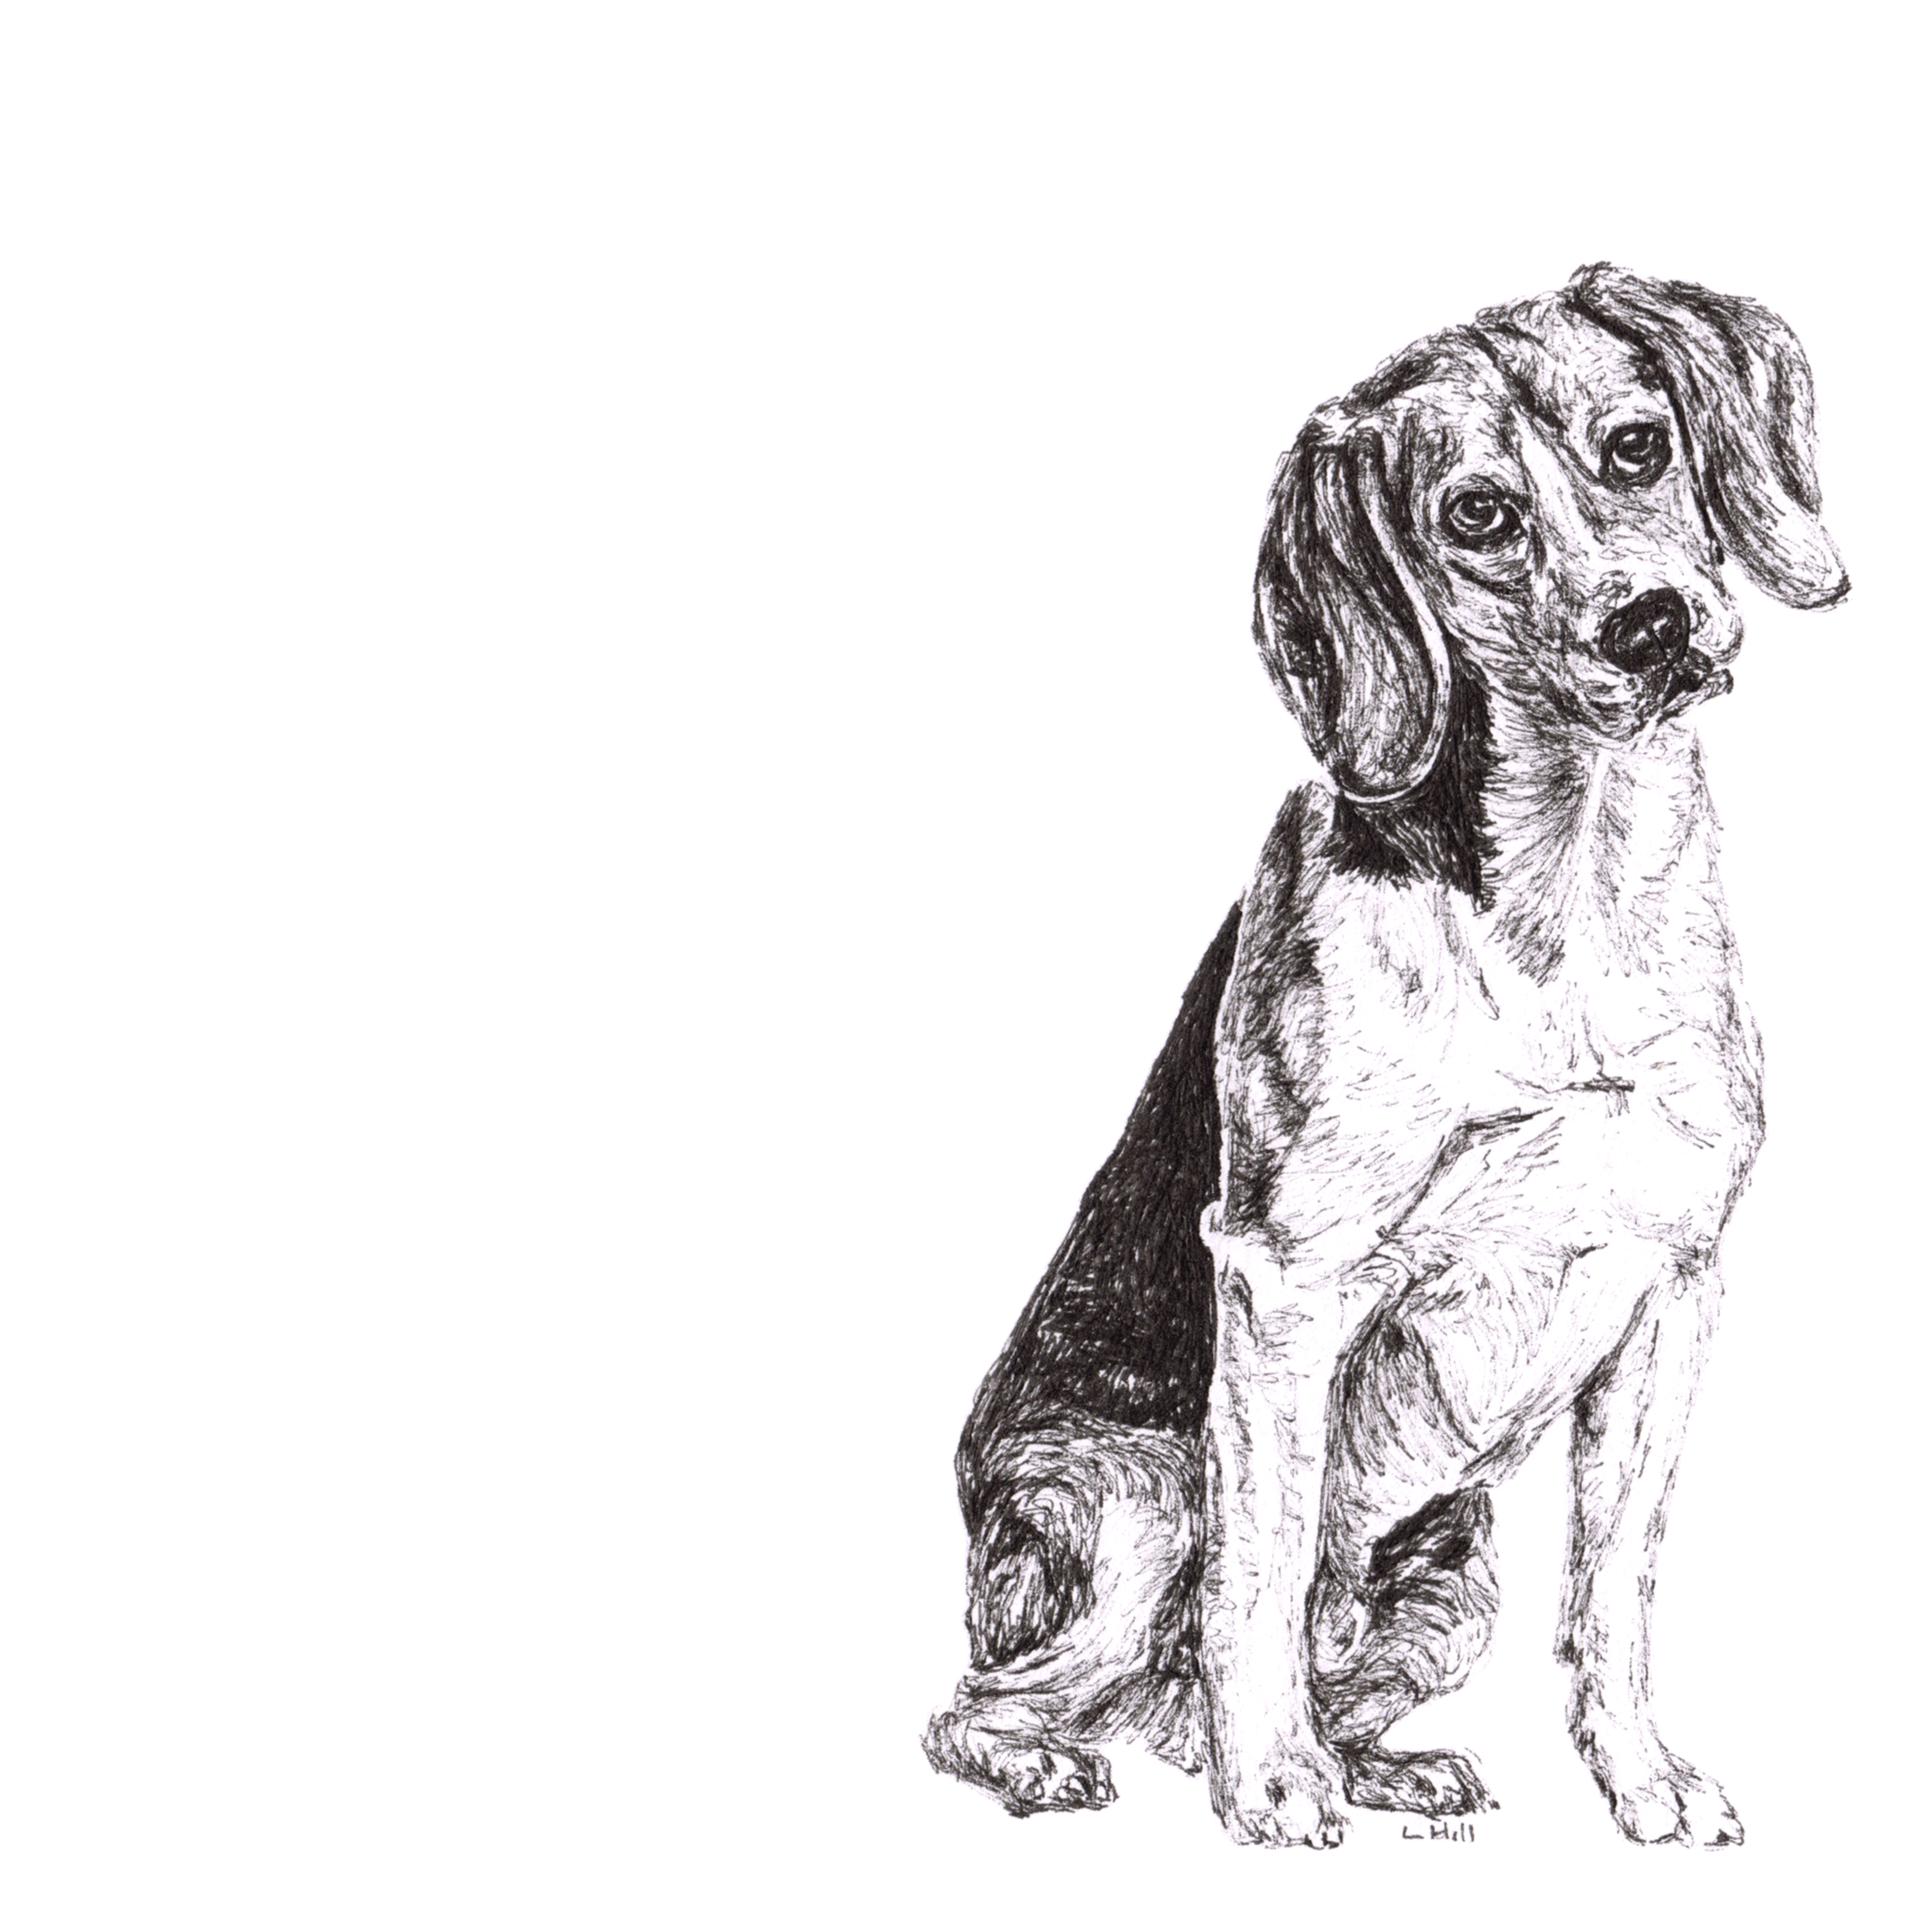 Beagle pen and ink illustration by Louisa Hill